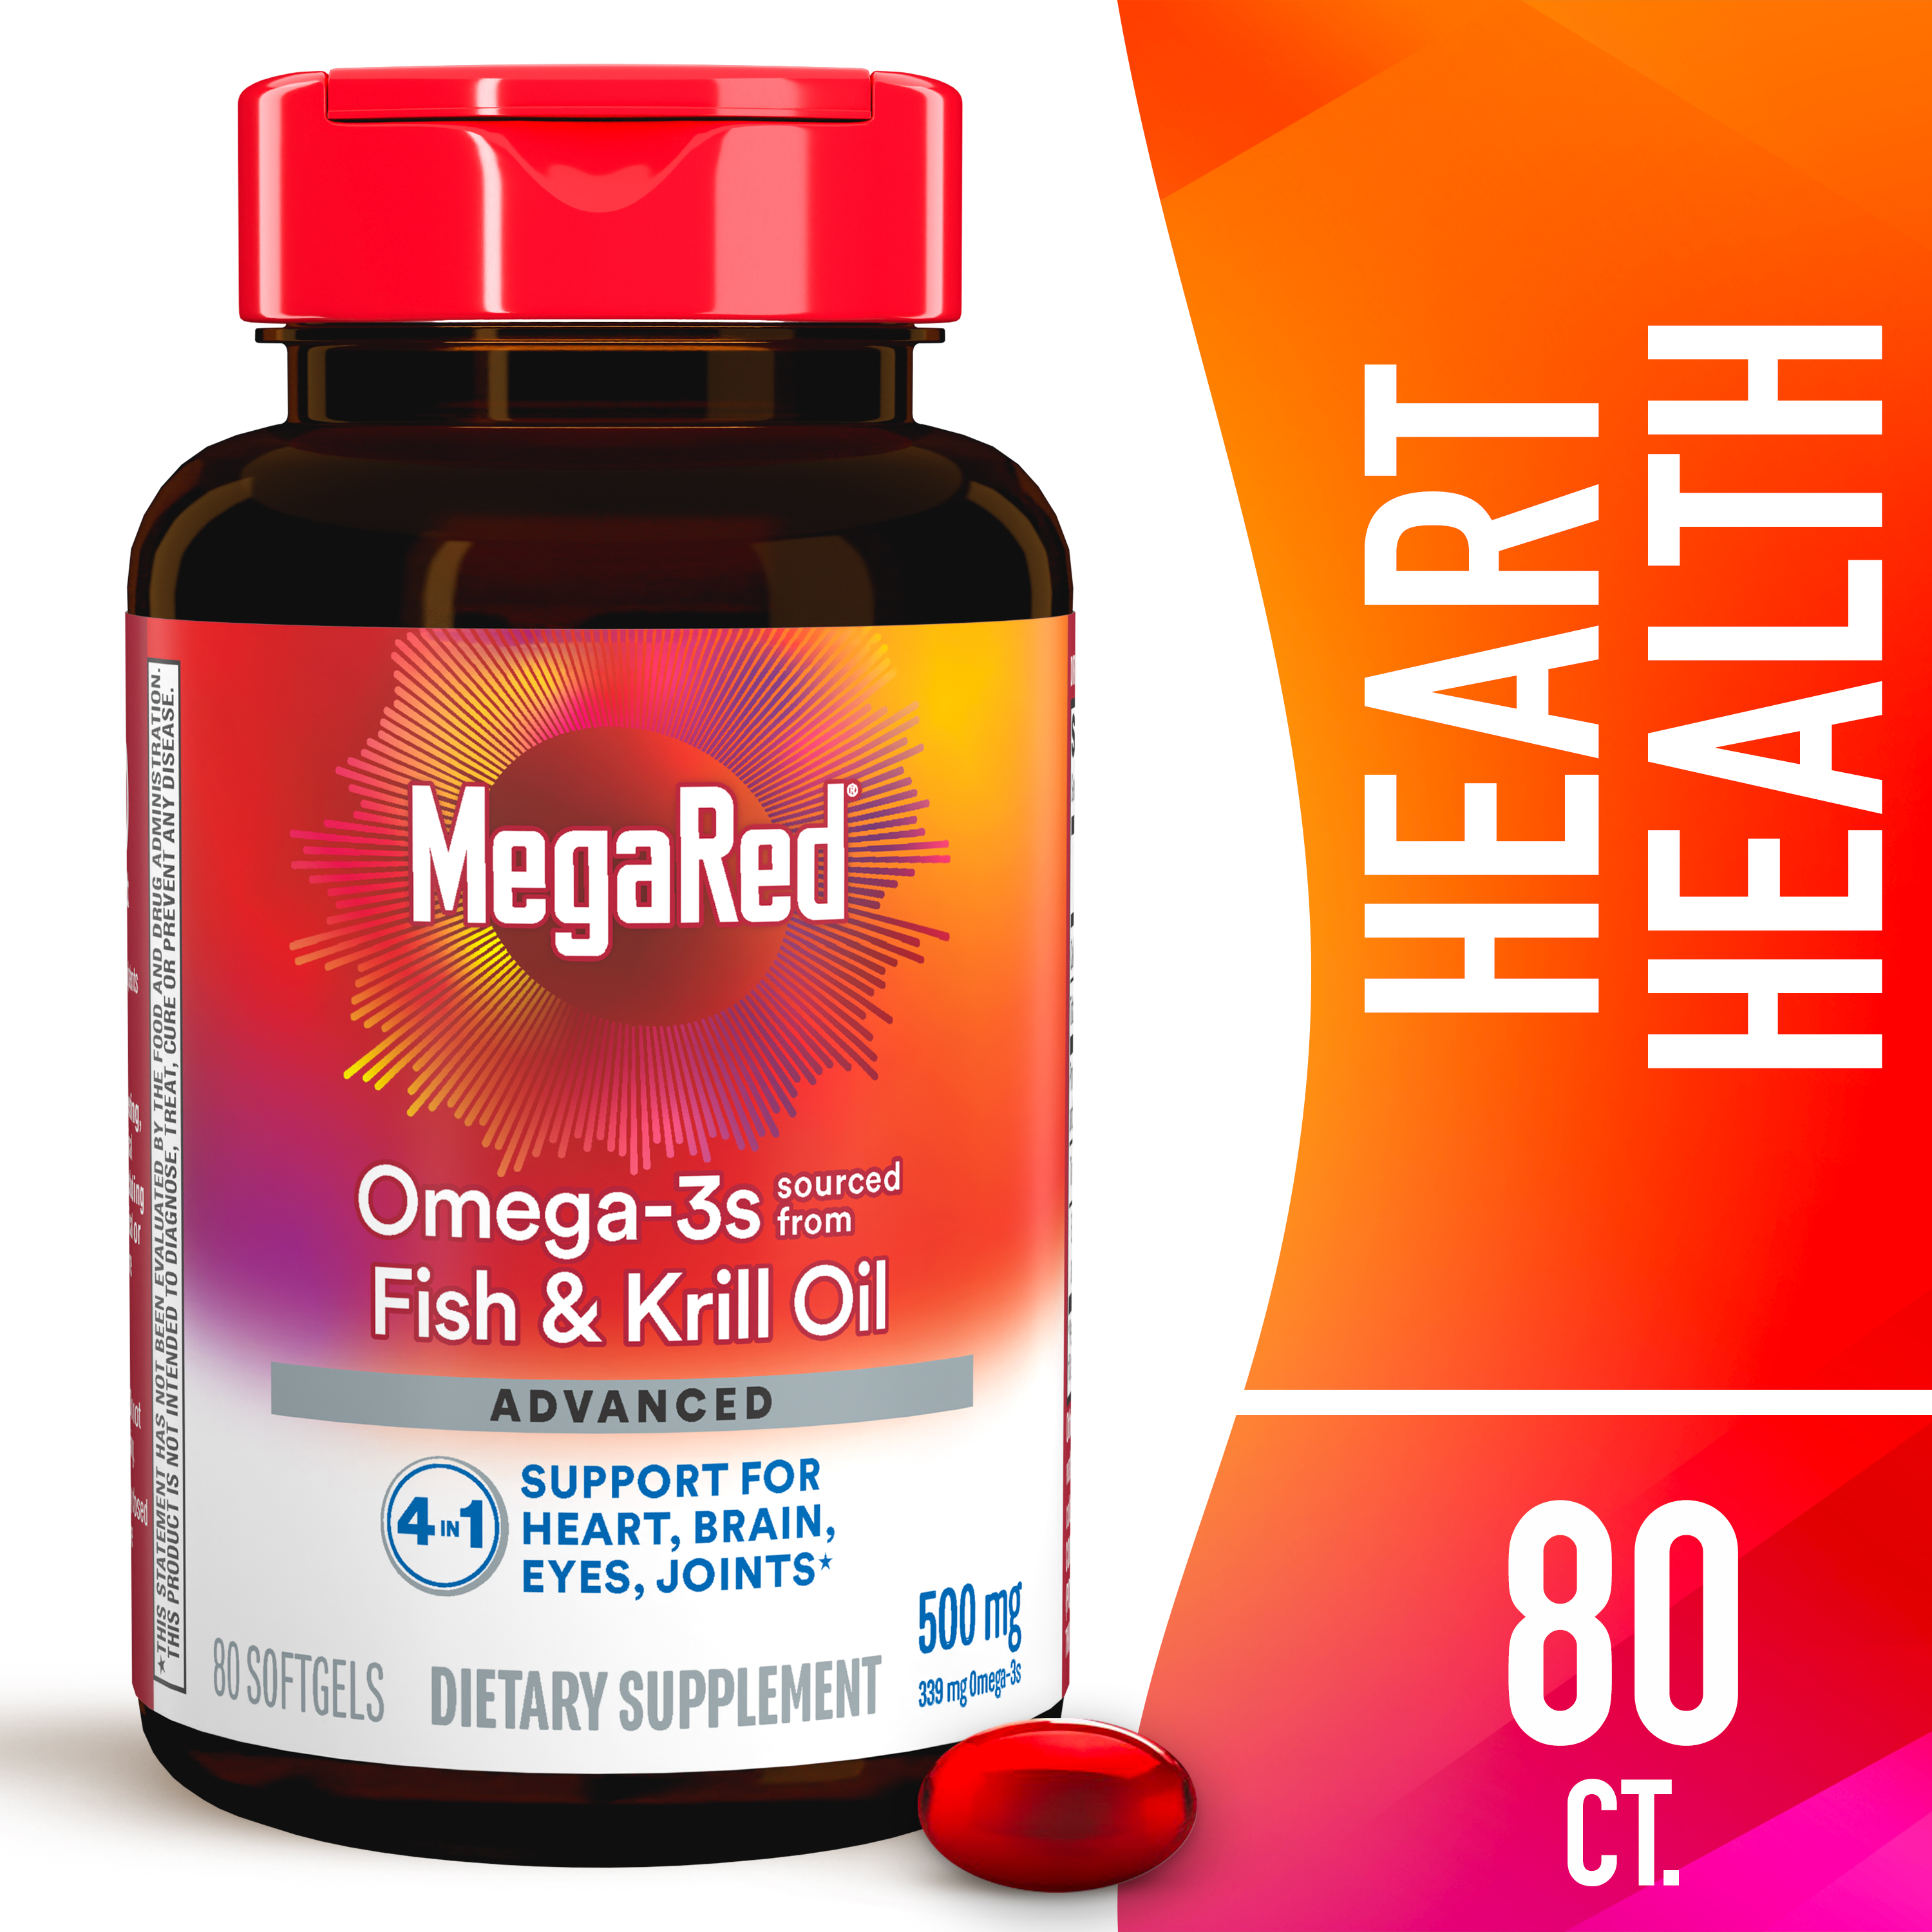 MegaRed Advanced 4in1 500mg, 80 Softgels - image 1 of 7